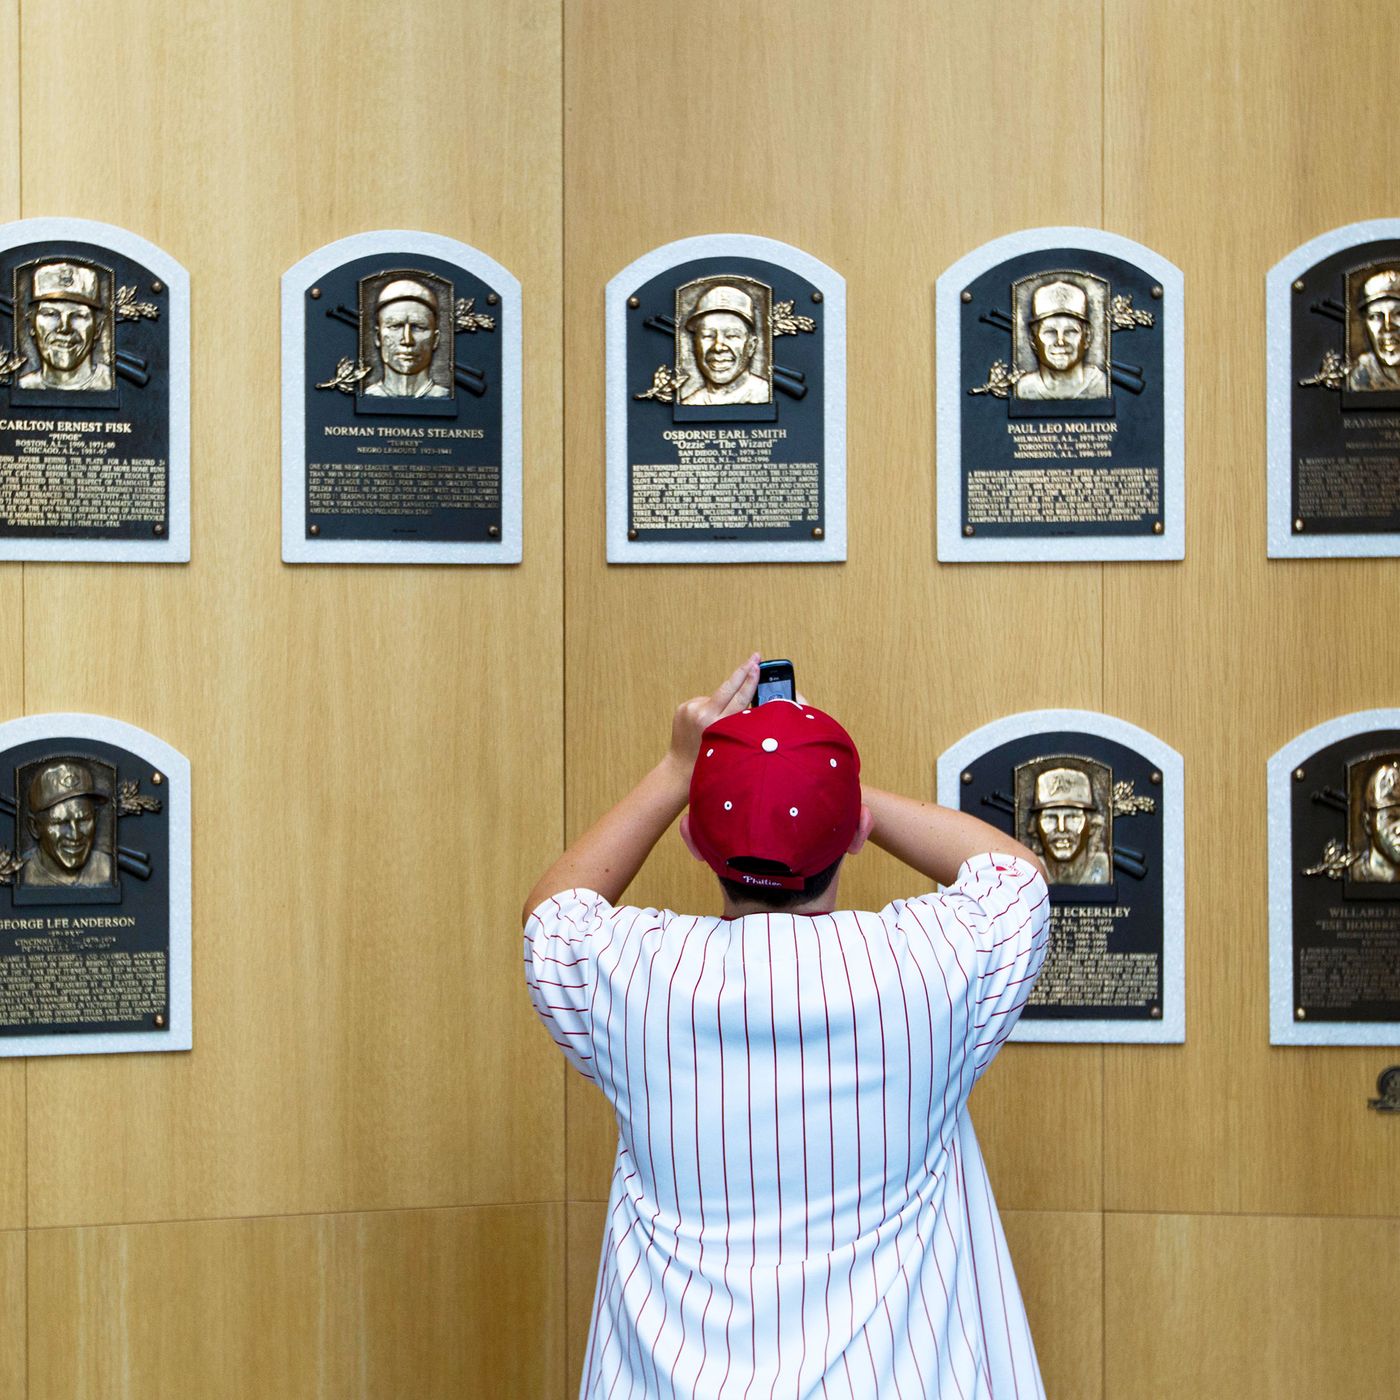 Baseball Hall of Fame almost done dealing with steroid era players